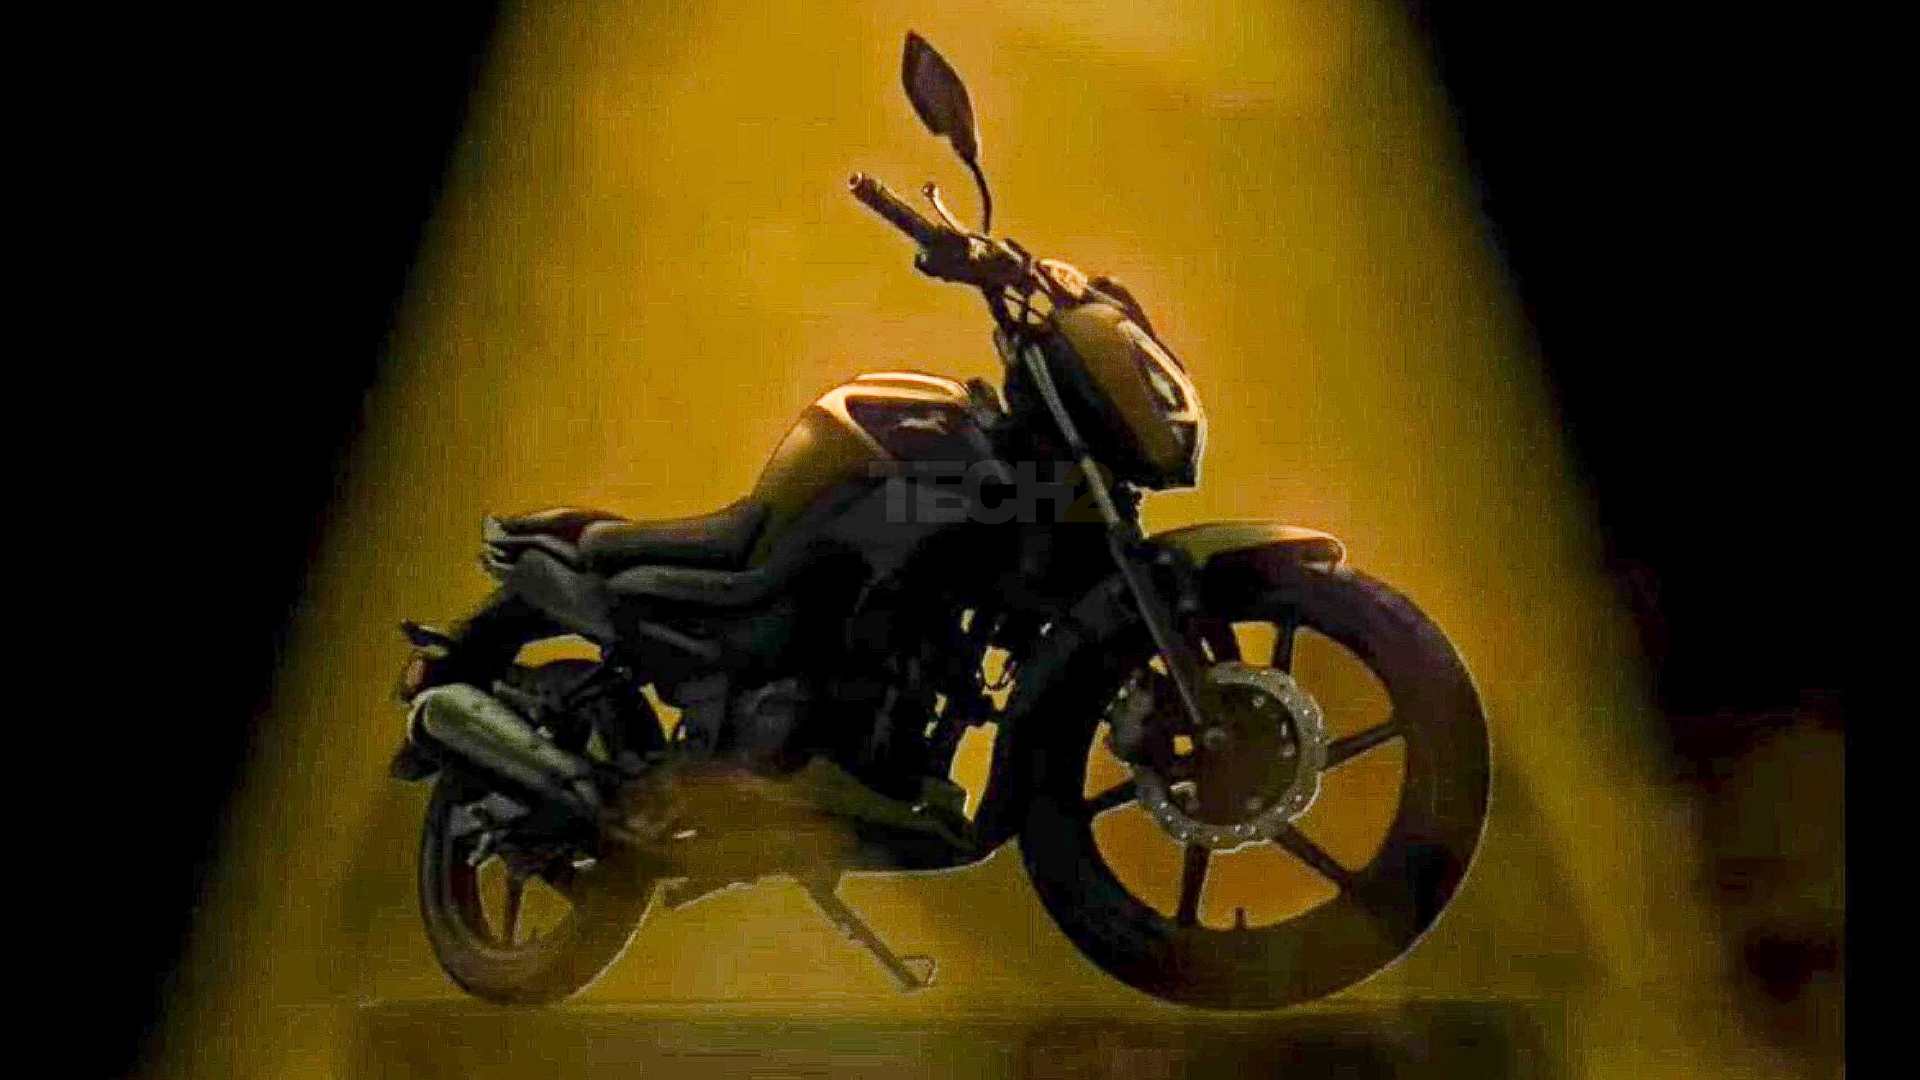 TVS Raiders Price From Rs 500 Get Ride Mode Technology News, Firstpost News Time